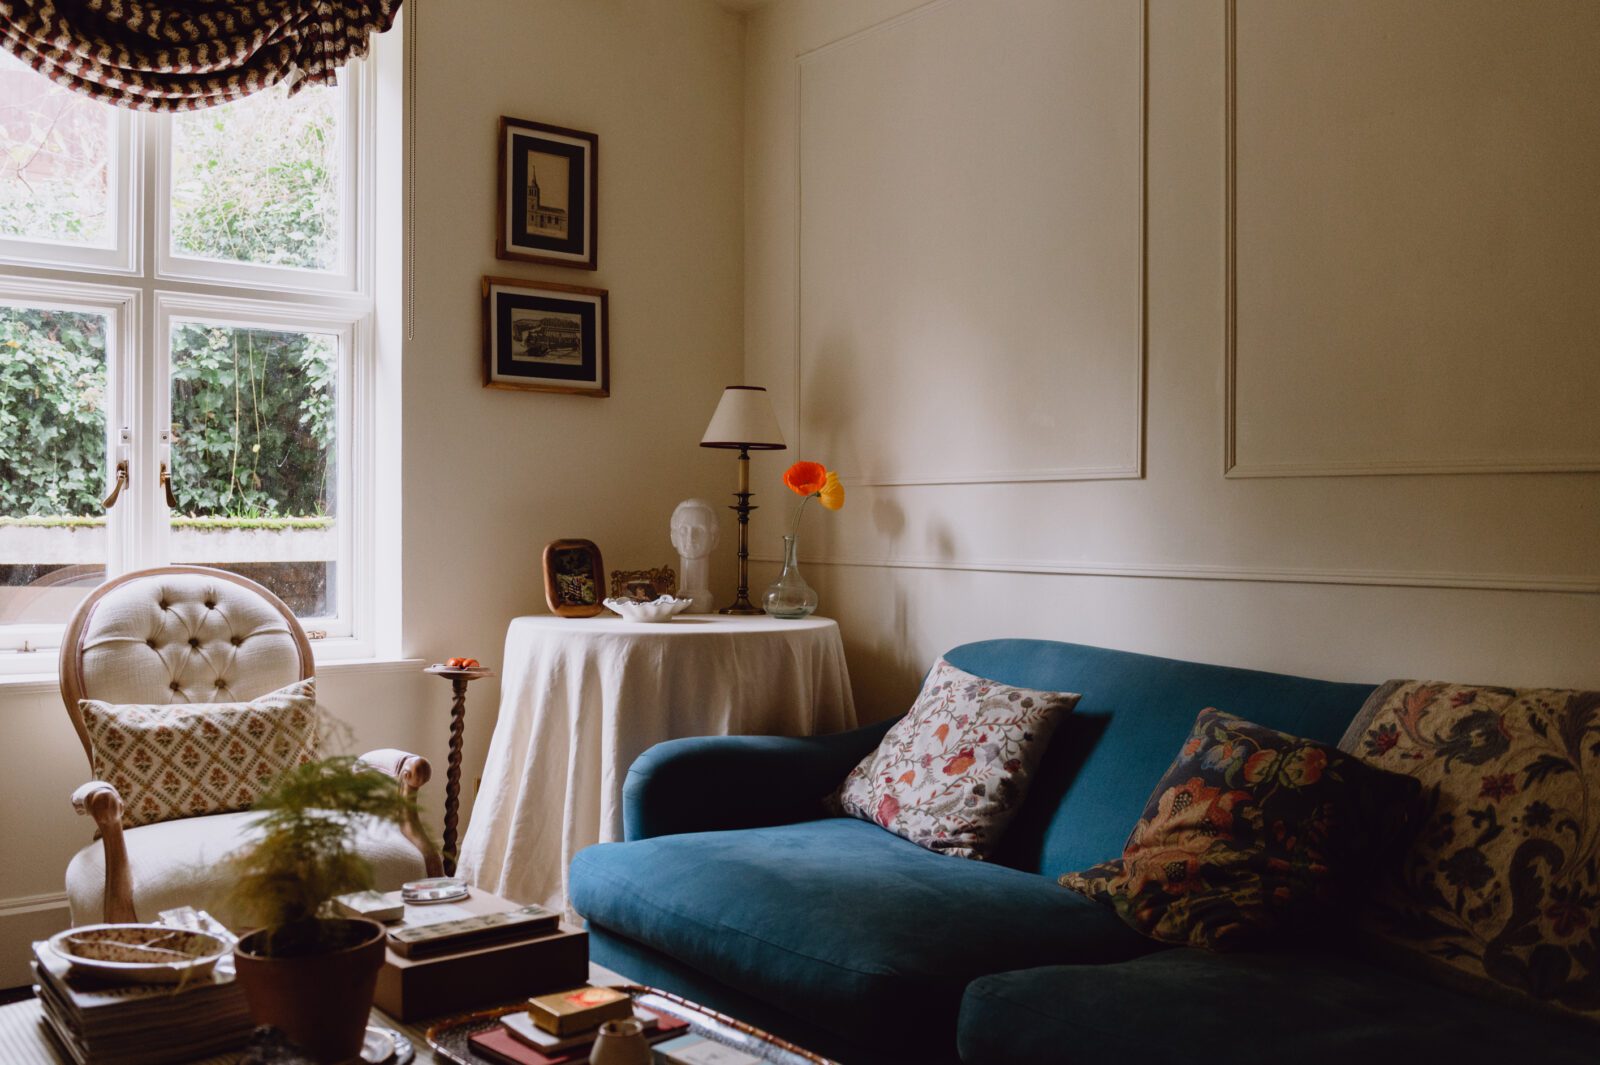 Gemma Moulton Home: 3 Things I Love About It | Wit & Delight